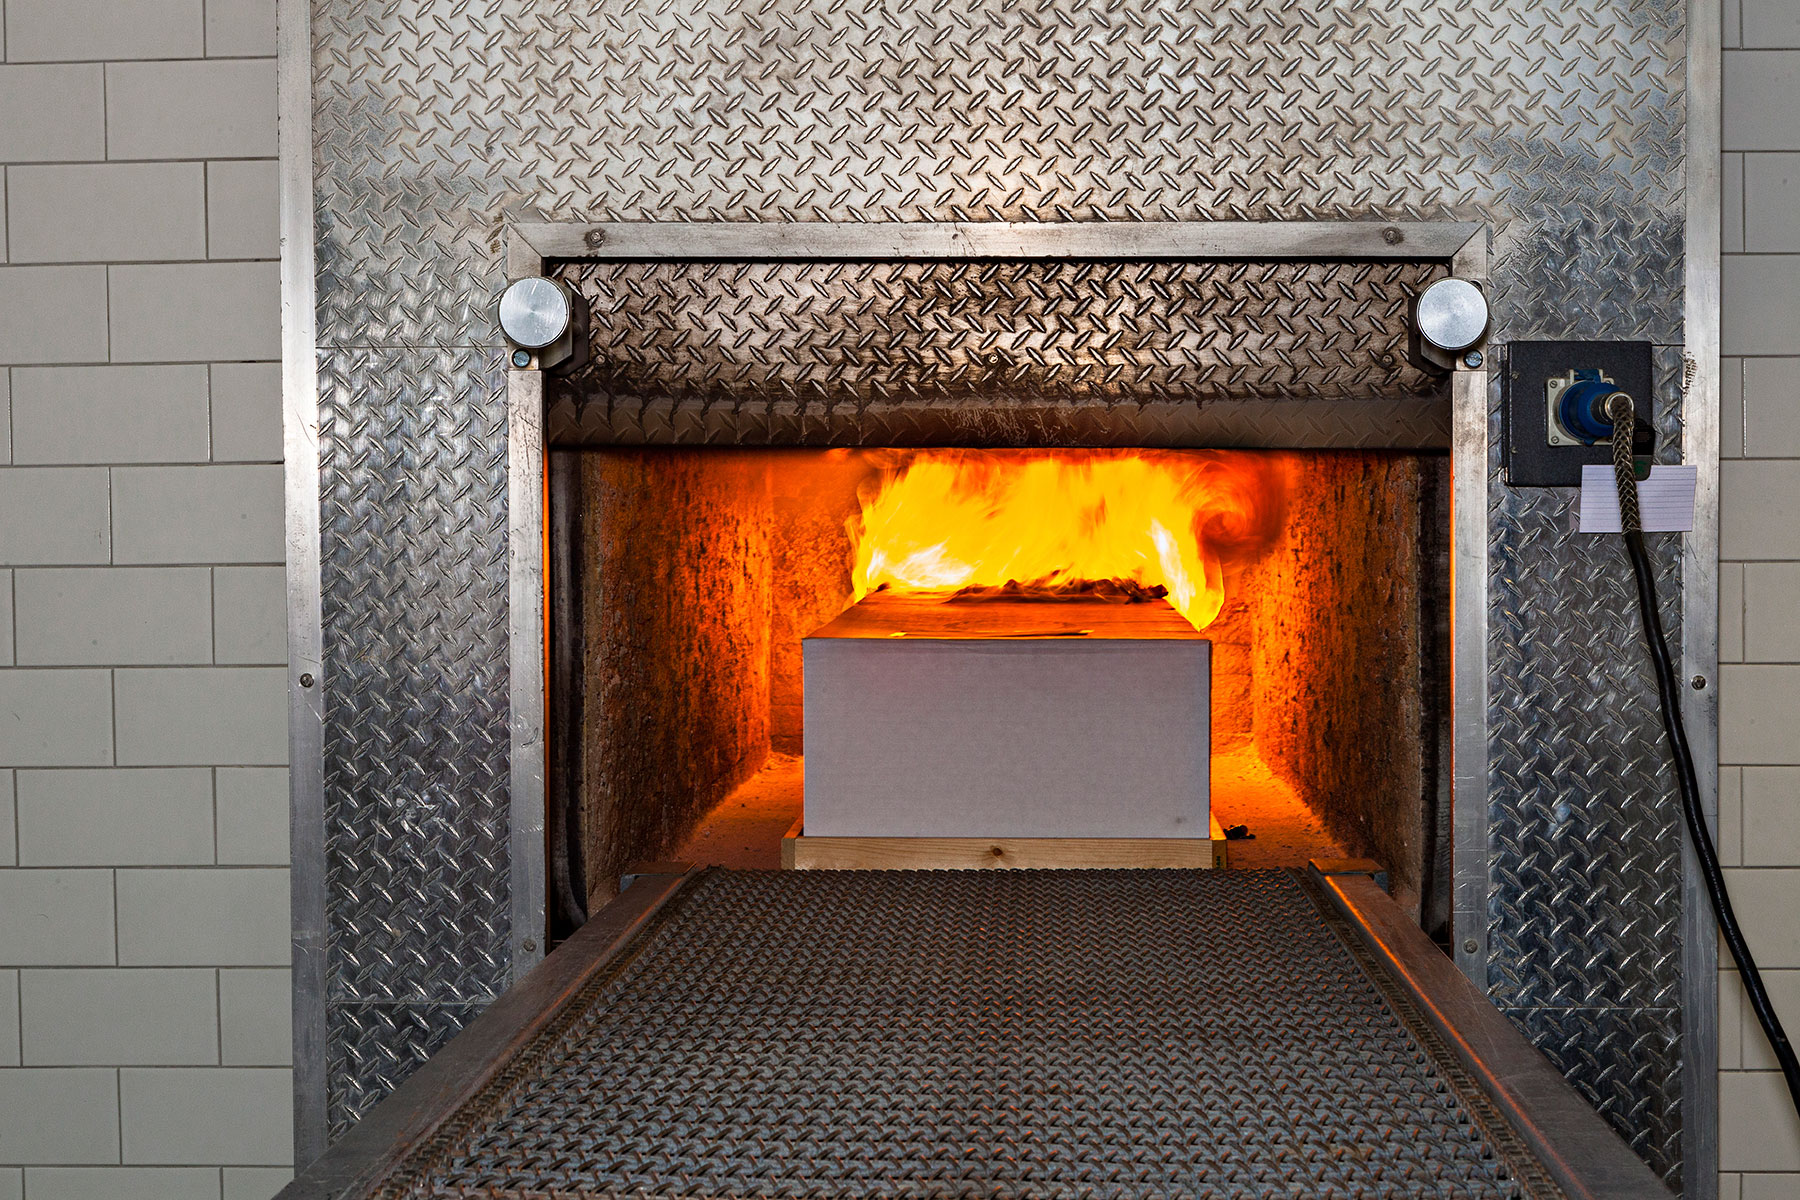 A body in the fire-based crematory oven of Lakewood Cemetery. (Lars Tunbjörk / Agence Vu for TIME)